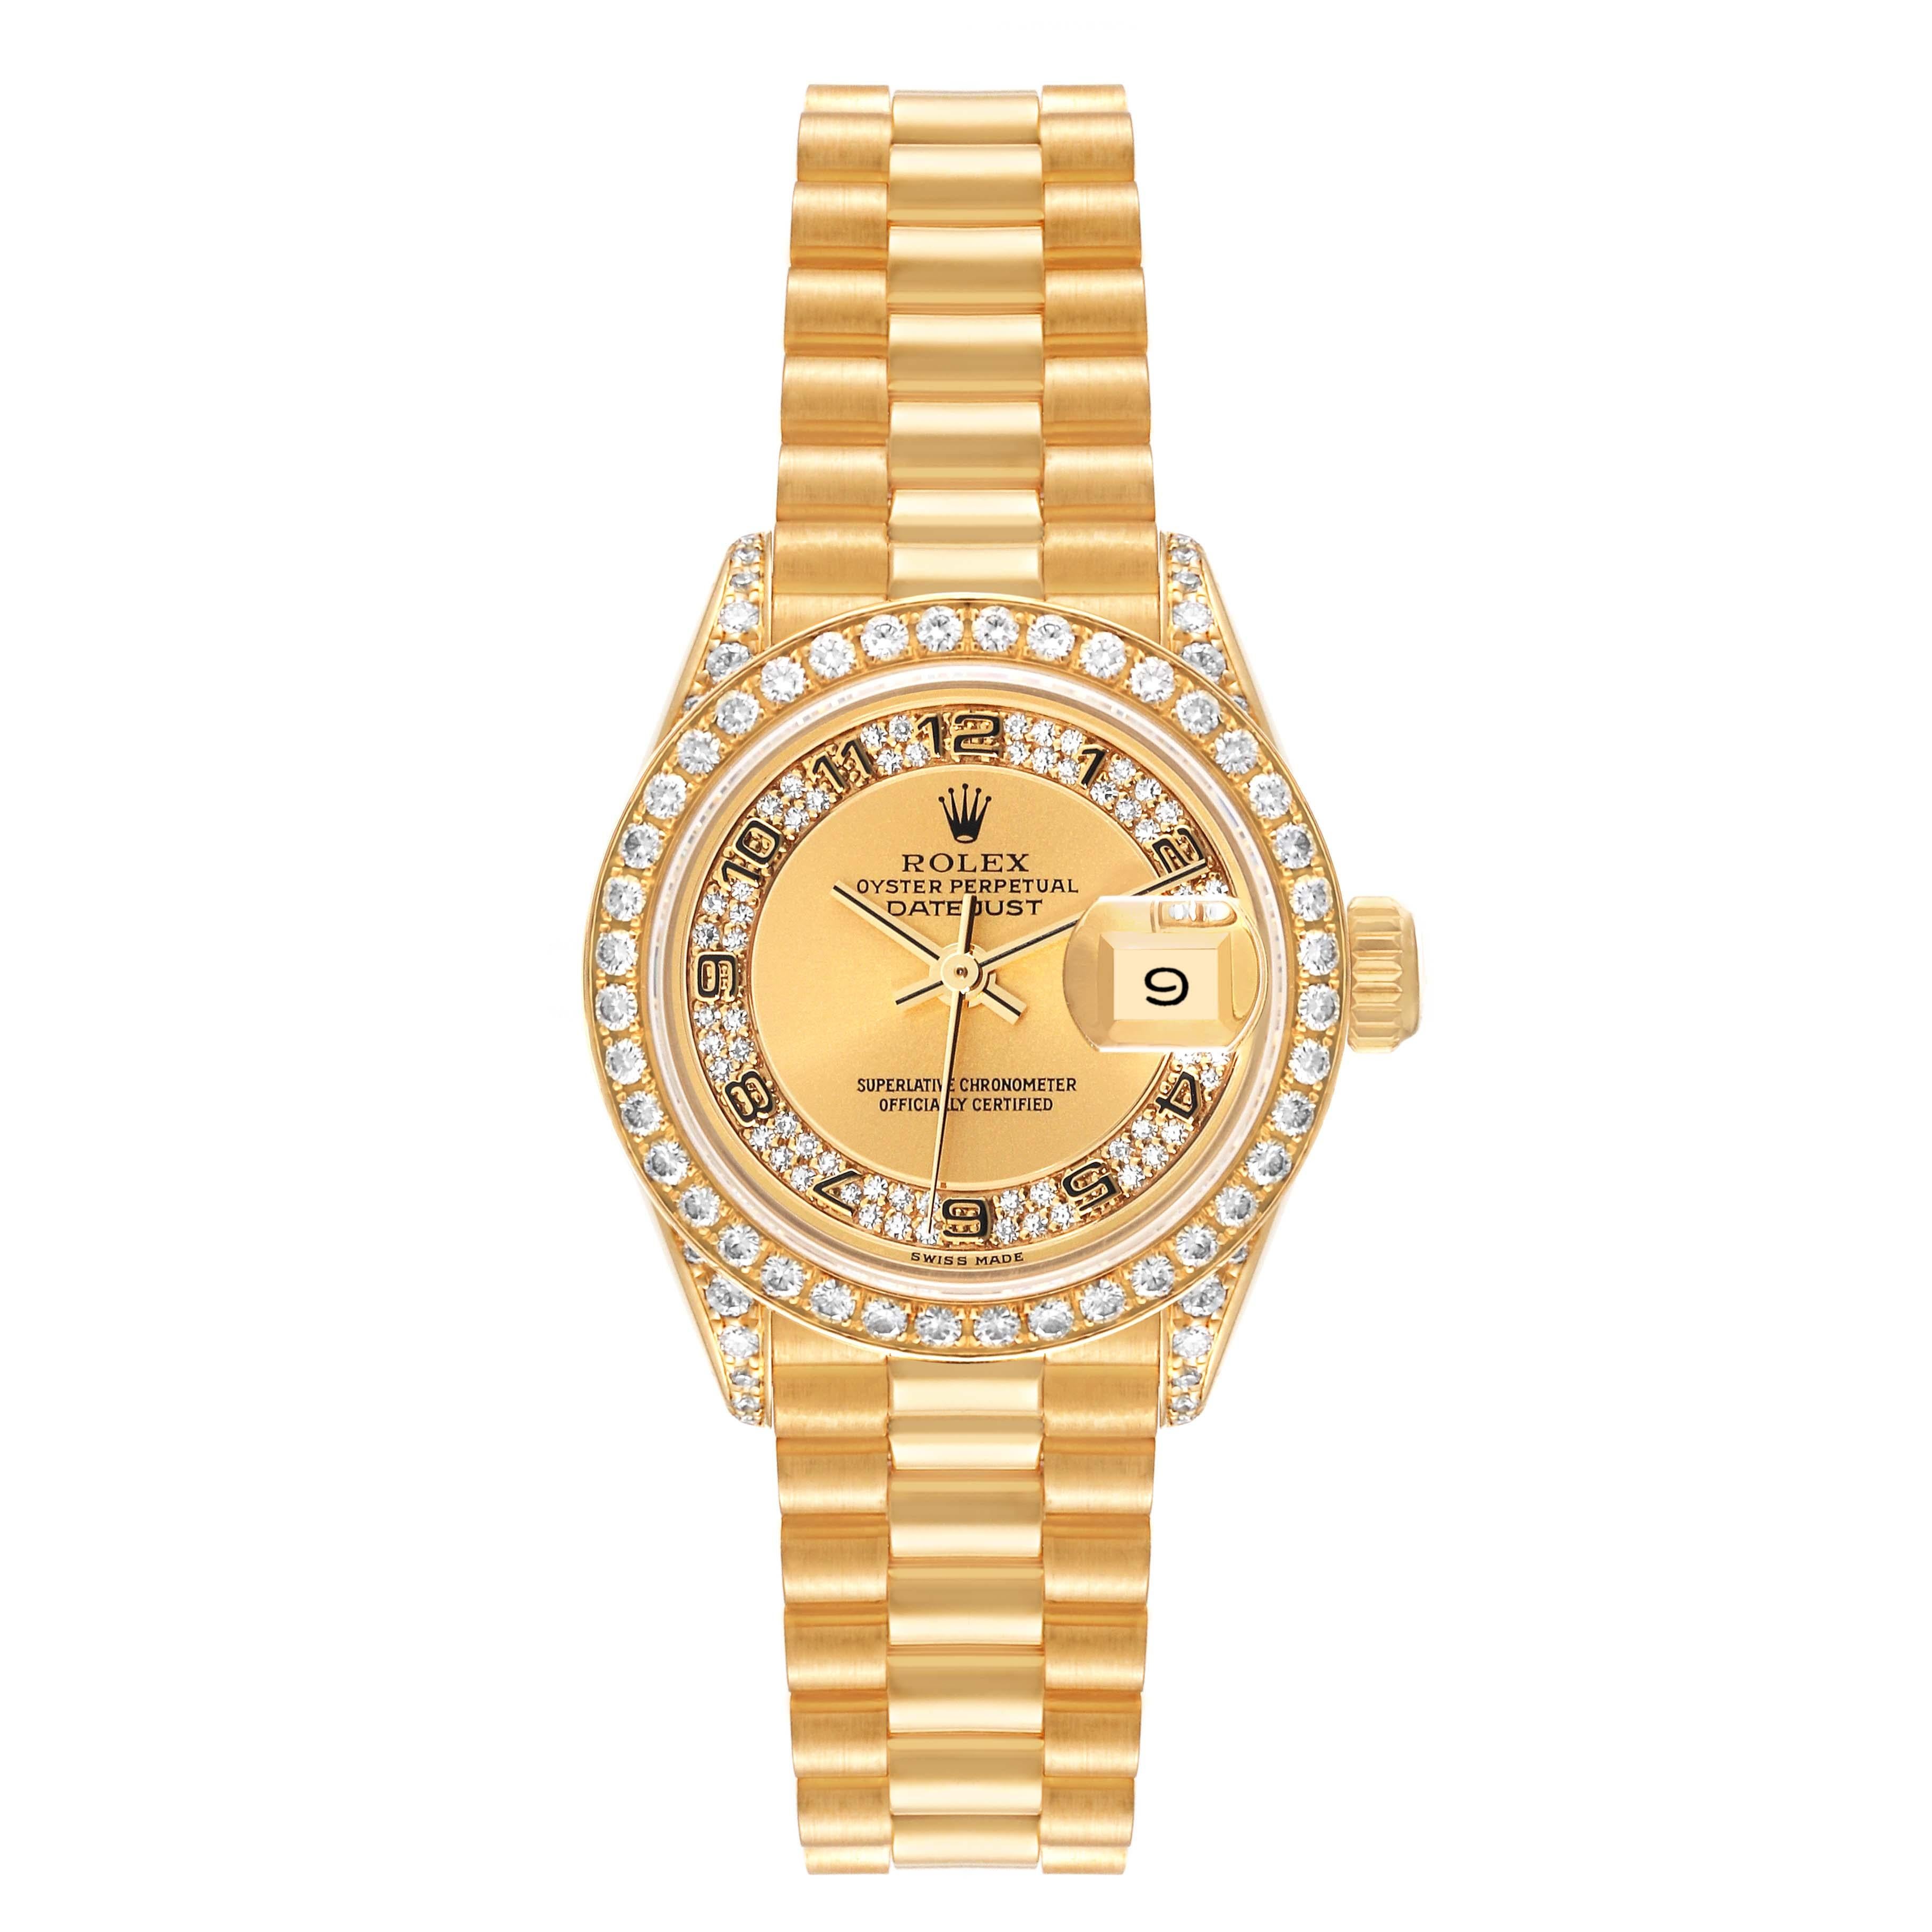 Rolex Datejust President Yellow Gold Diamond Ladies Watch 69158. Officially certified chronometer automatic self-winding movement. 18k yellow gold oyster case 26.0 mm in diameter. Lugs set with original Rolex factory diamonds. Rolex coronet logo on